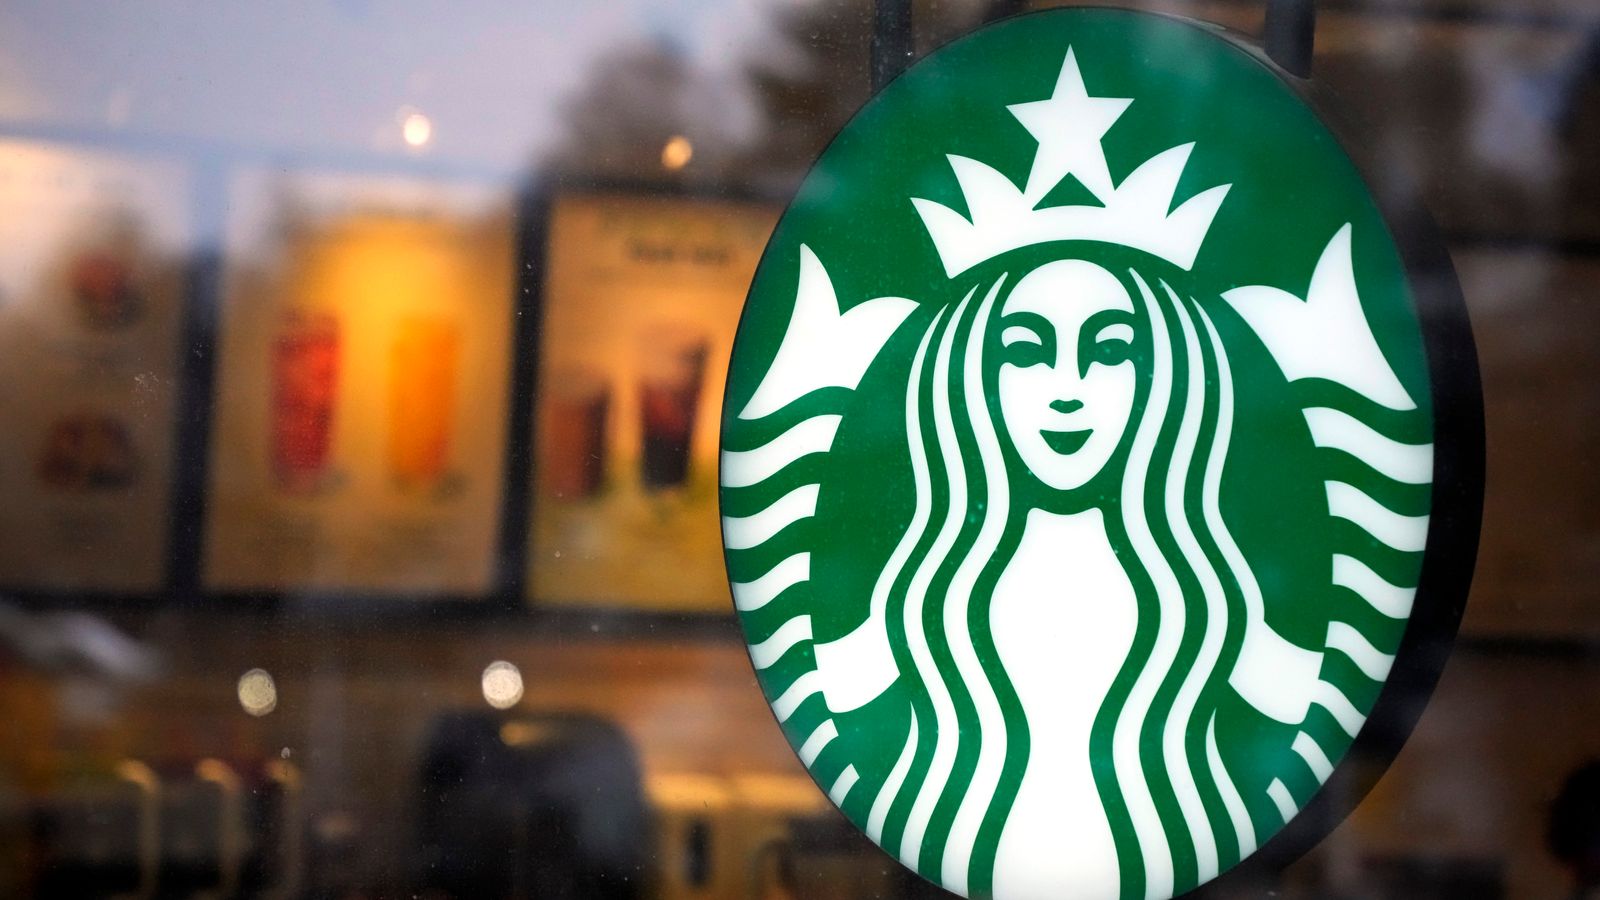 Starbucks plans to open 100 new UK sites in Europe expansion